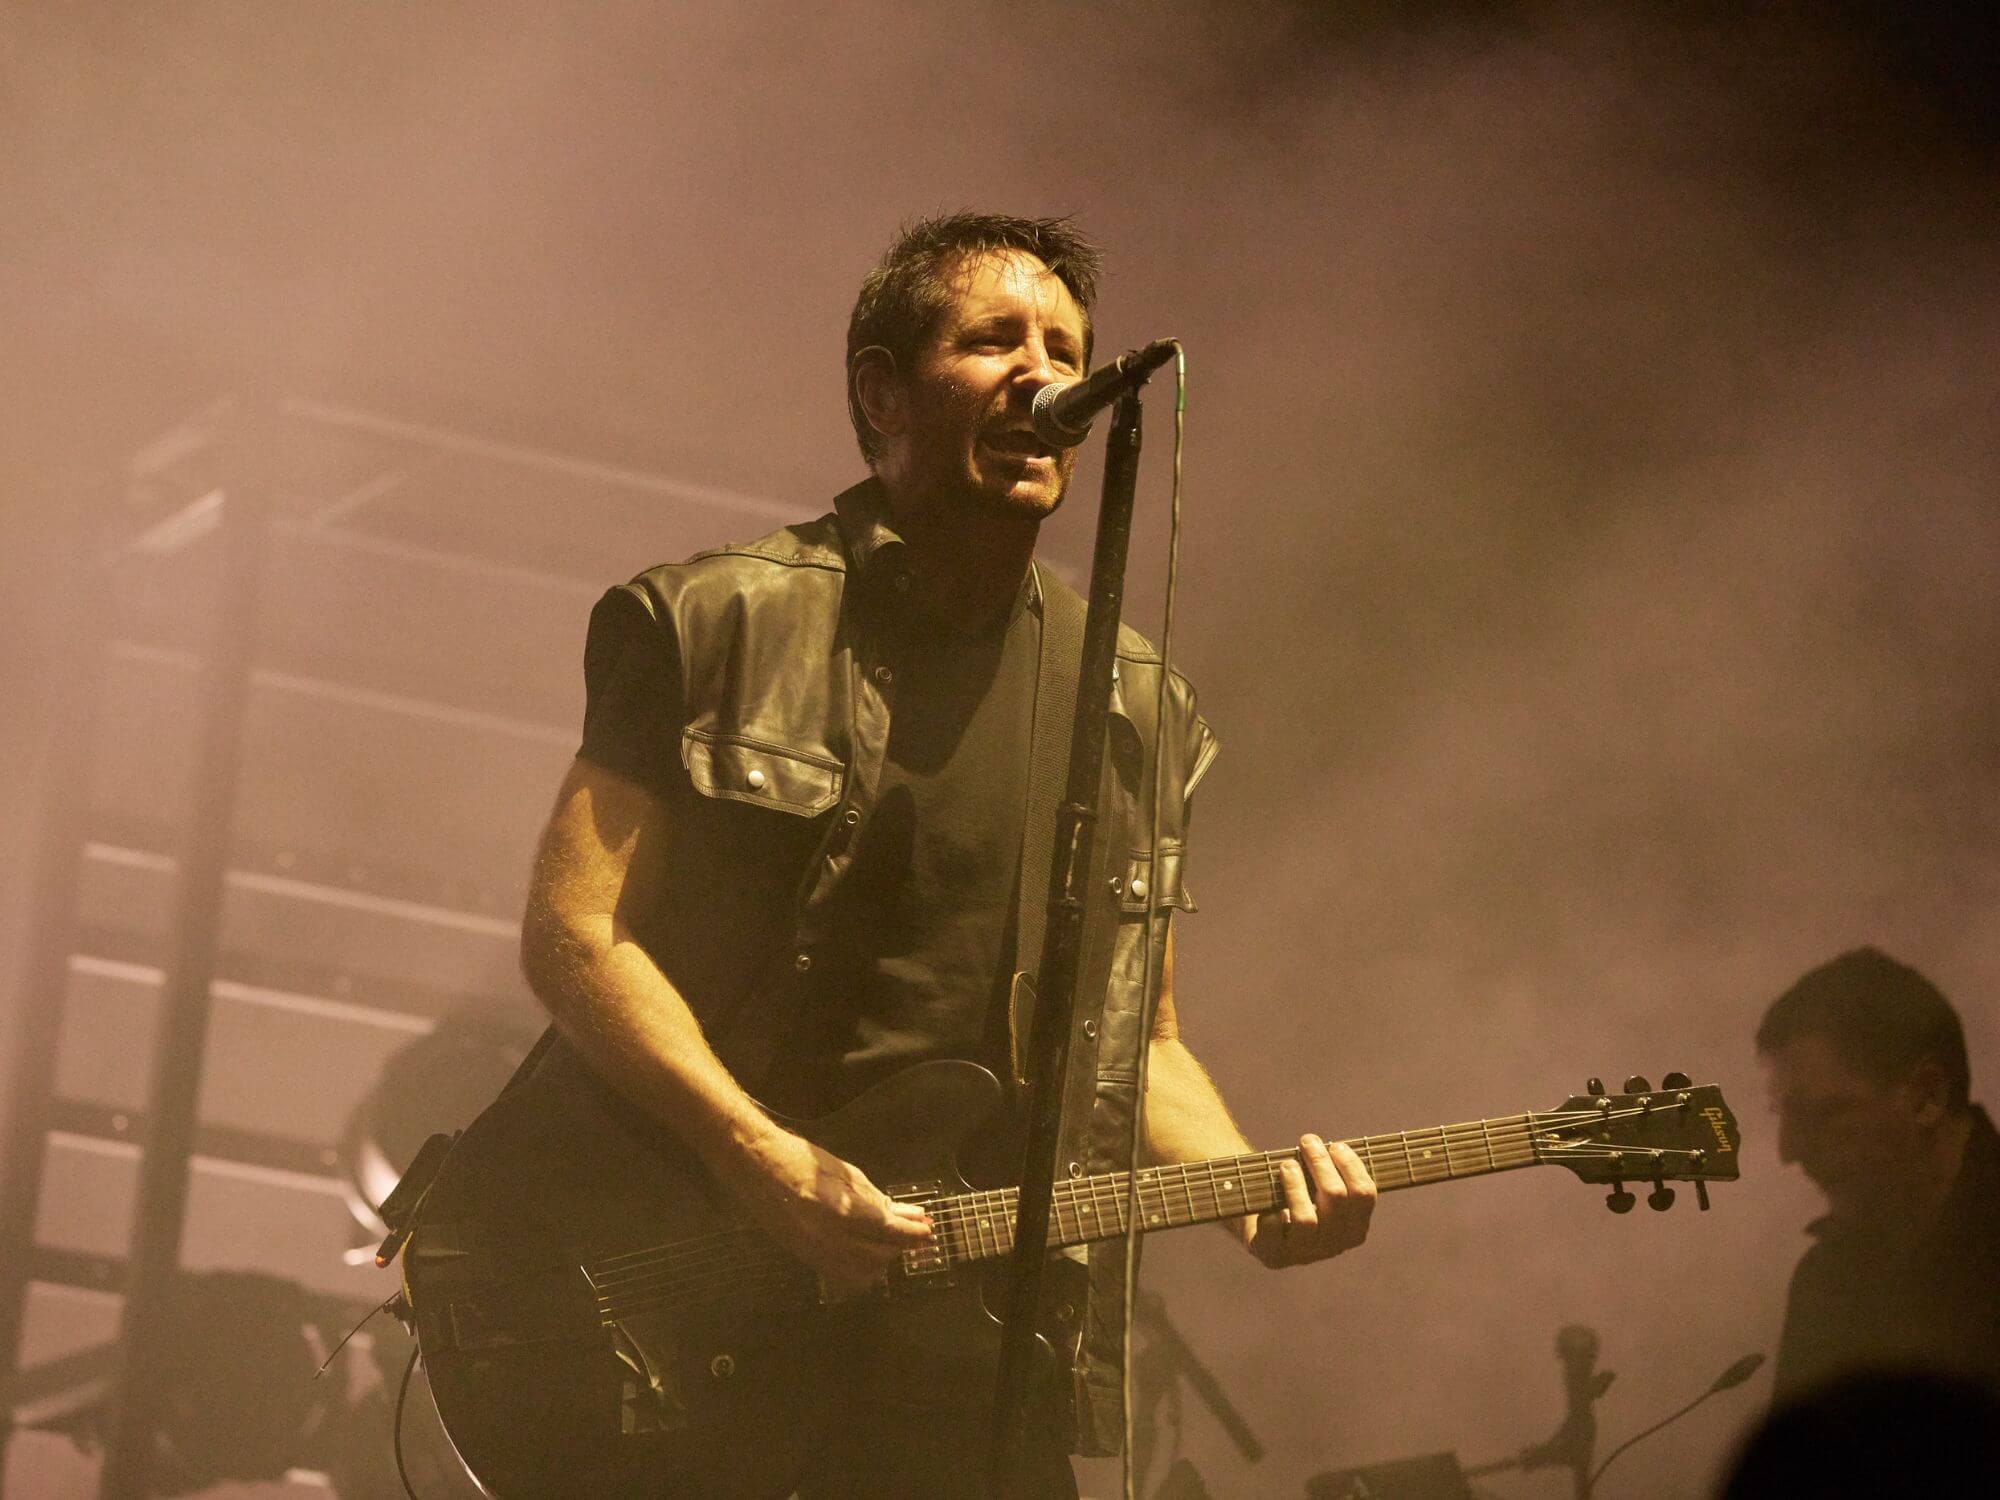 Trent Reznor thinks affordable synths lead to “lifeless” music